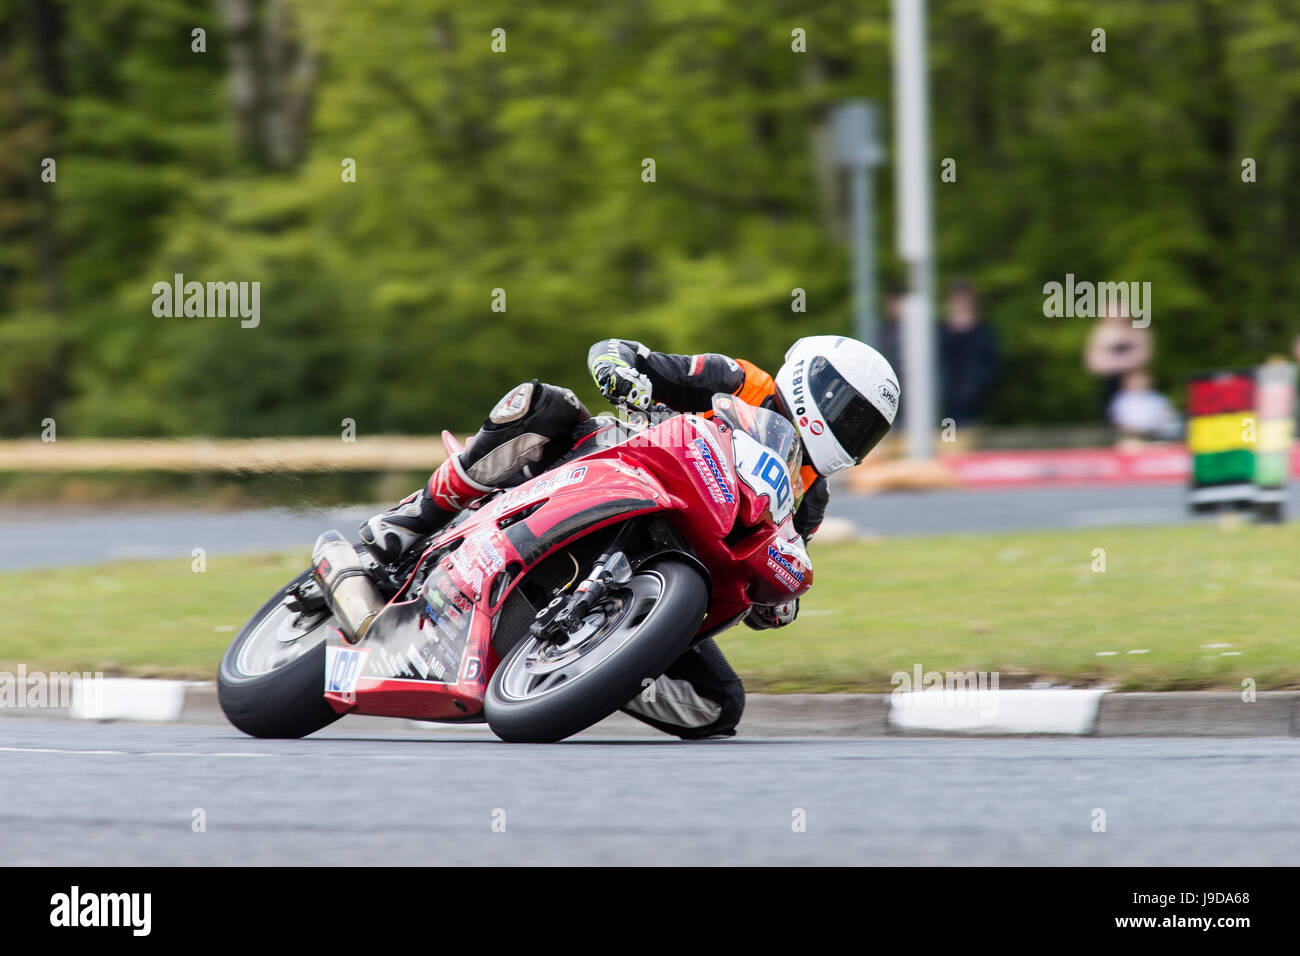 North West 200 2017 Motorcycle Road Racing Stock Photo